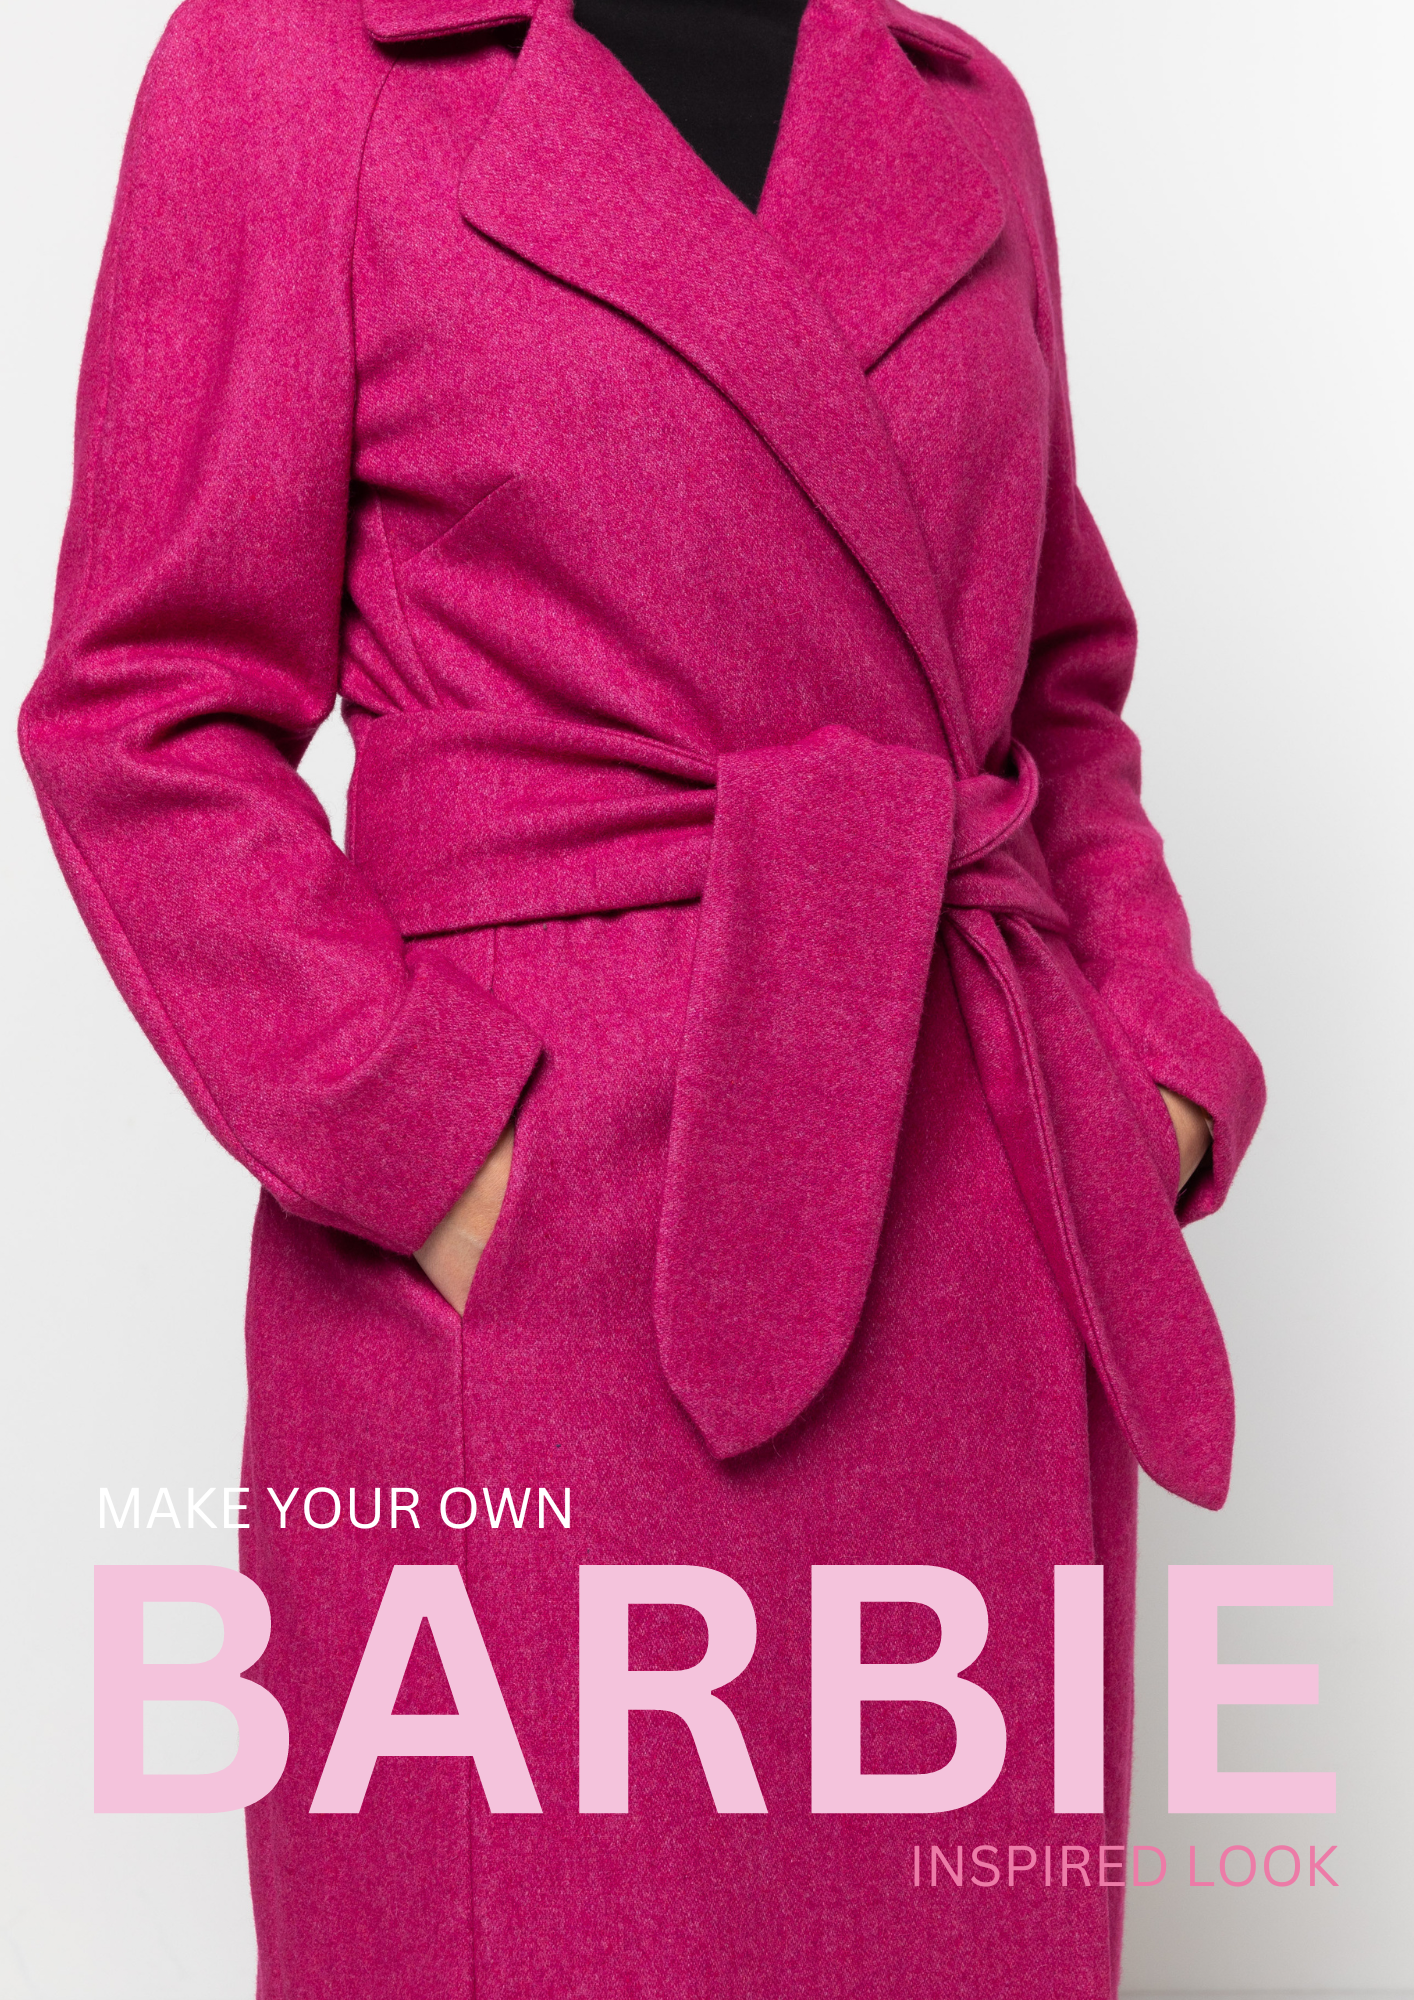 Make your own Barbie inspired look!